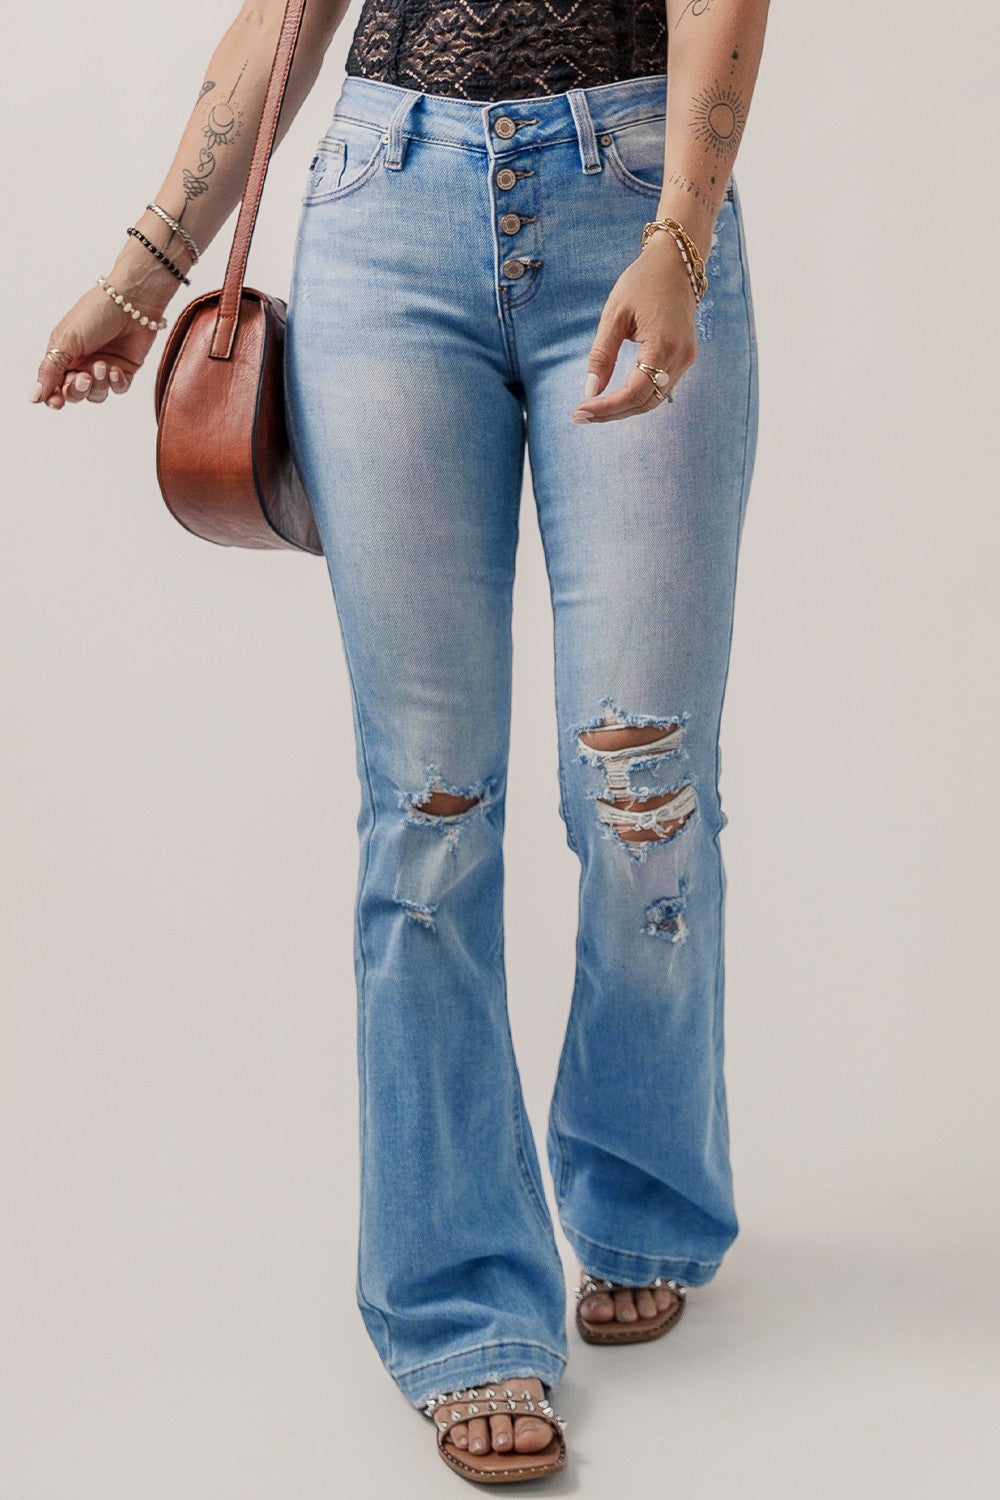 Shop the latest Button-Fly Distressed Flare Jeans - a perfect fusion of vintage style and edgy modern fashion for a chic, versatile look